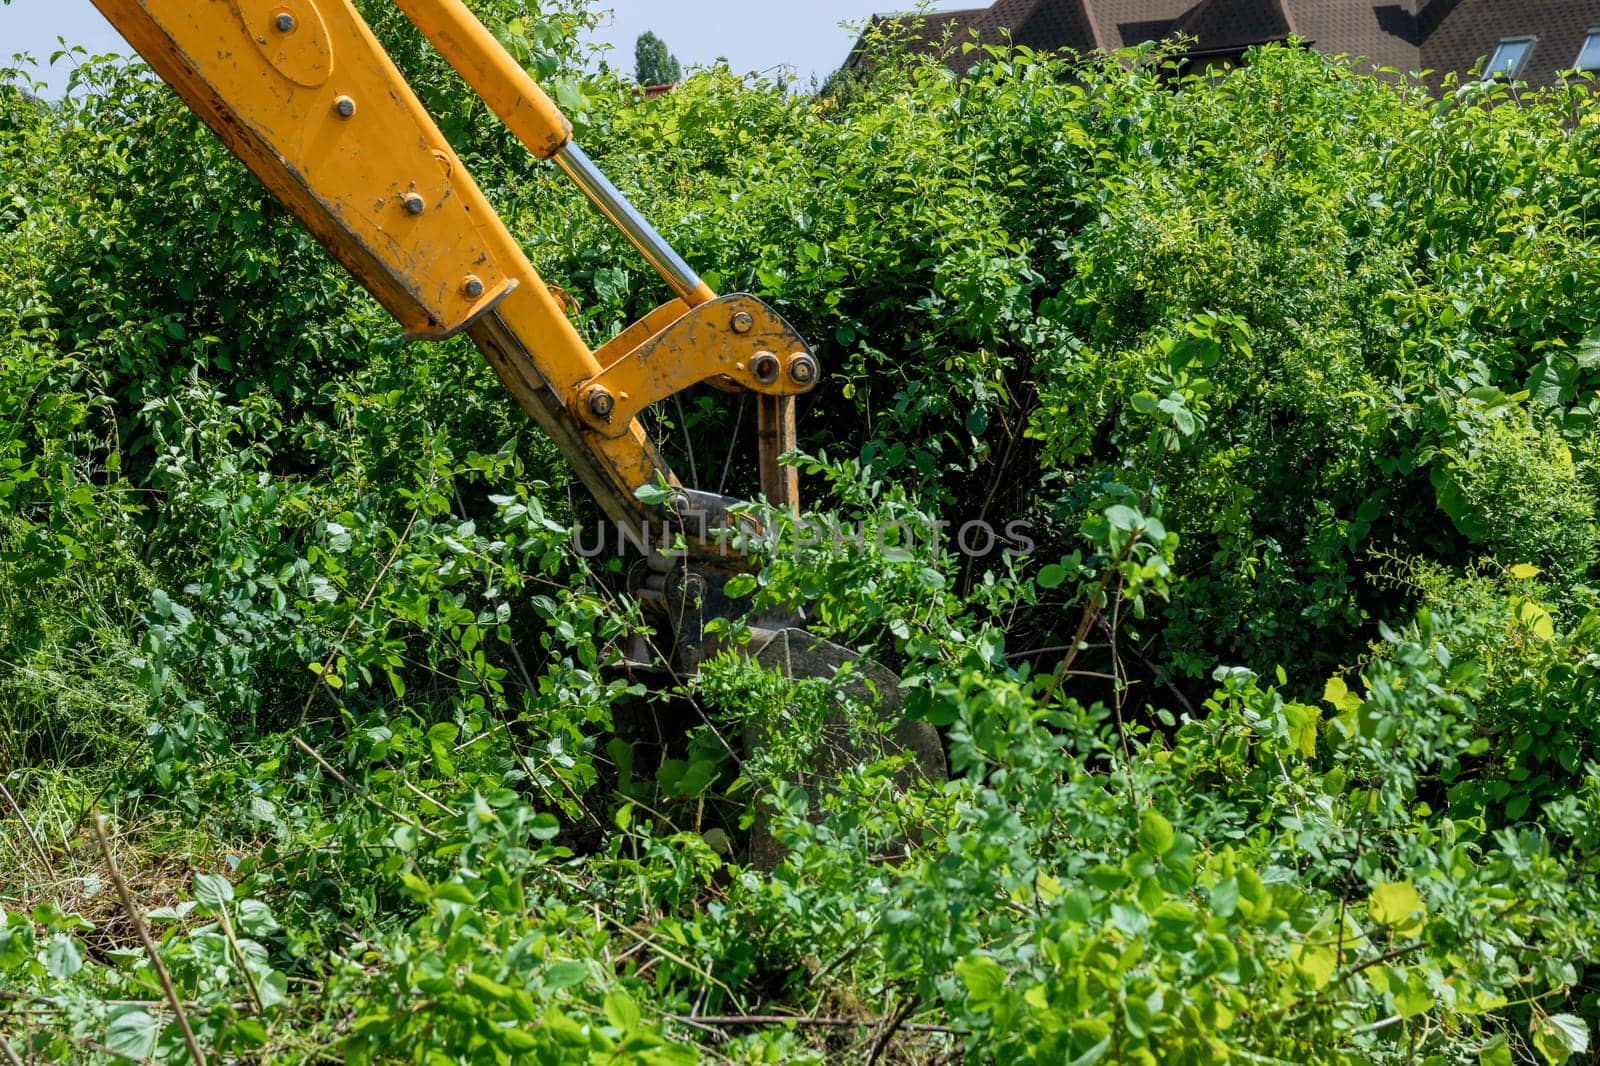 Powerful bucket of excavator efficiently removes bushes and trees from designated area. by Yaroslav